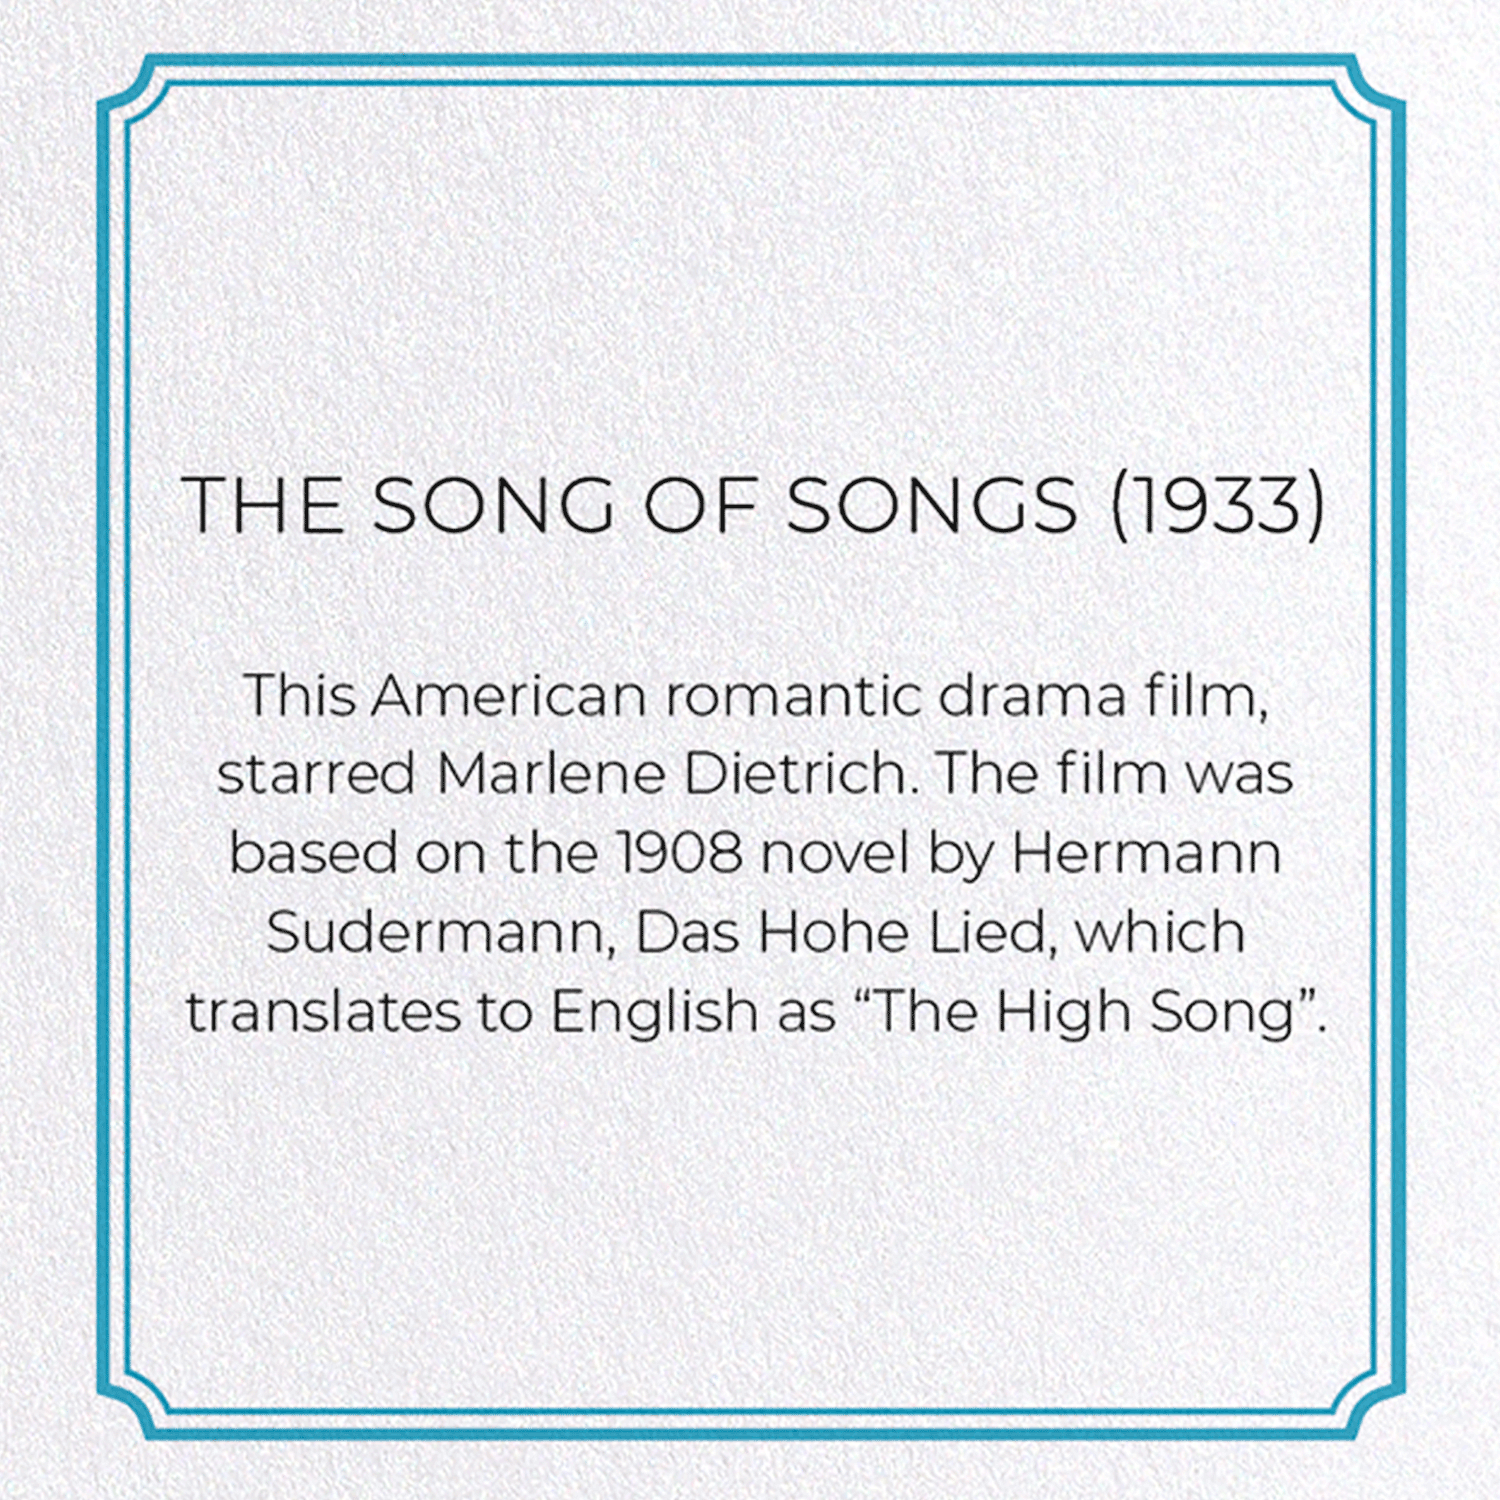 THE SONG OF SONGS (1933): Poster Greeting Card